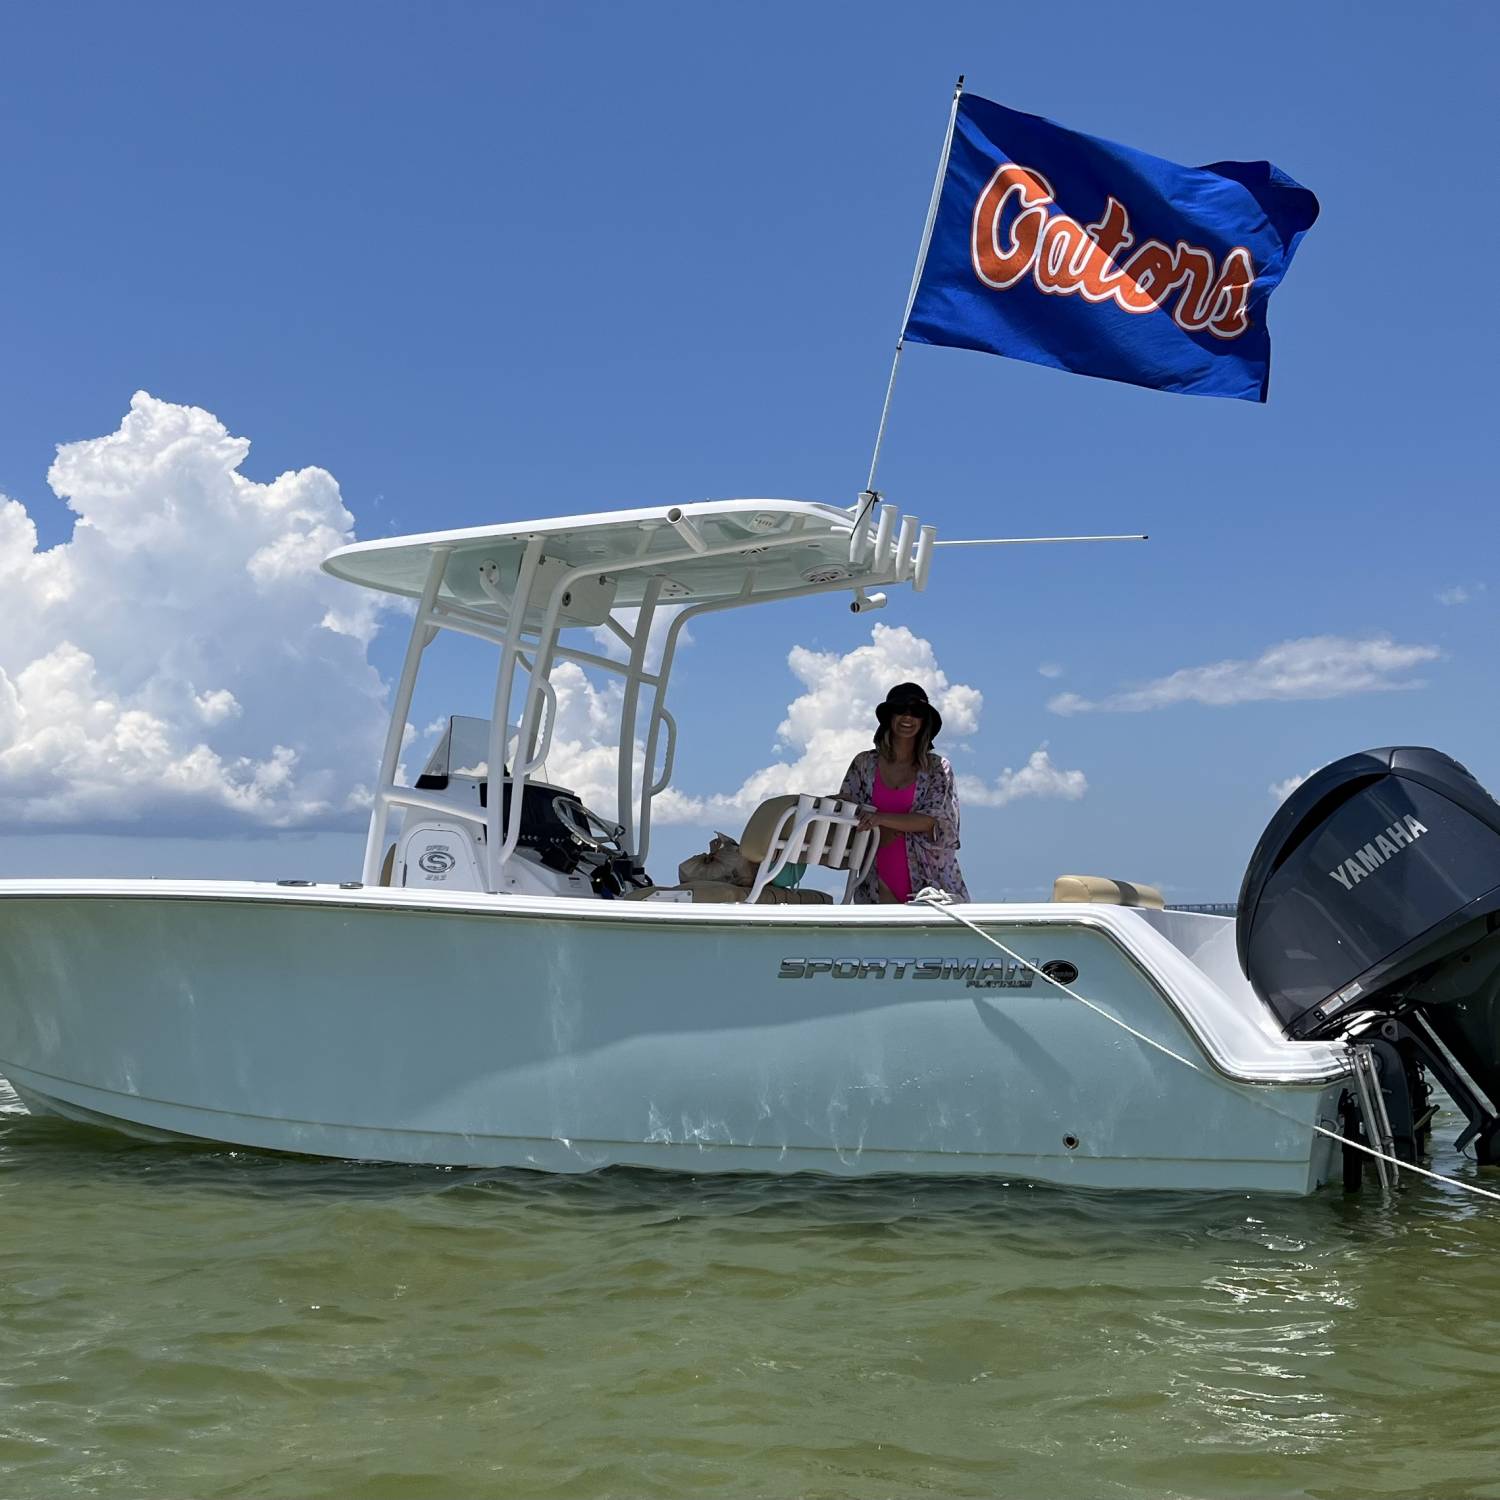 Title: Sandbar Sunday - On board their Sportsman Open 232 Center Console - Location: Tampa Bay FL. Participating in the Photo Contest #SportsmanMay